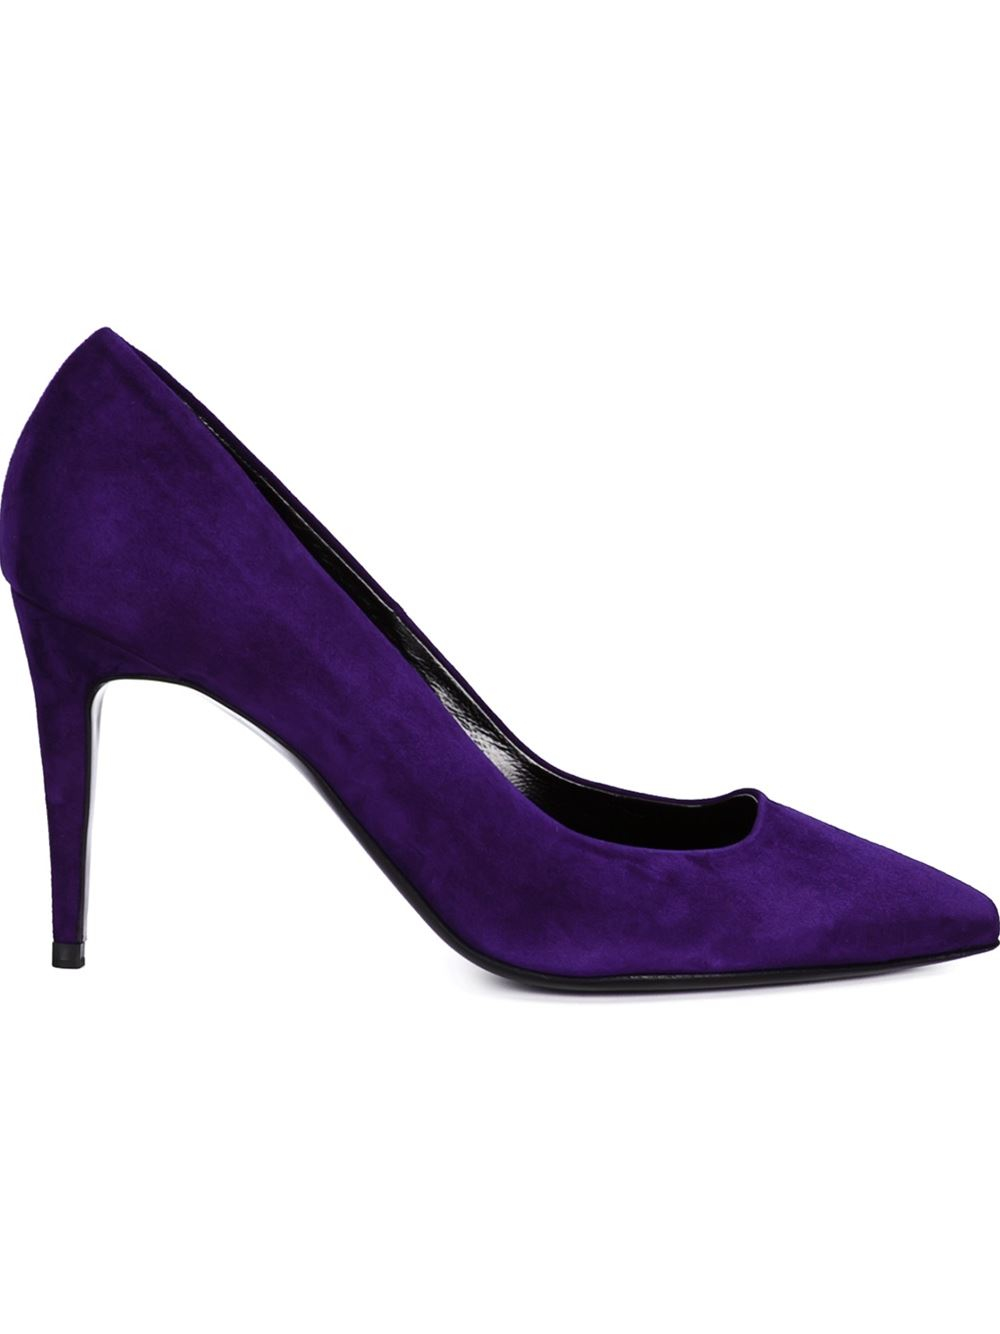 Pierre Hardy Suede Pump Shoes in Pink (pink & purple) | Lyst